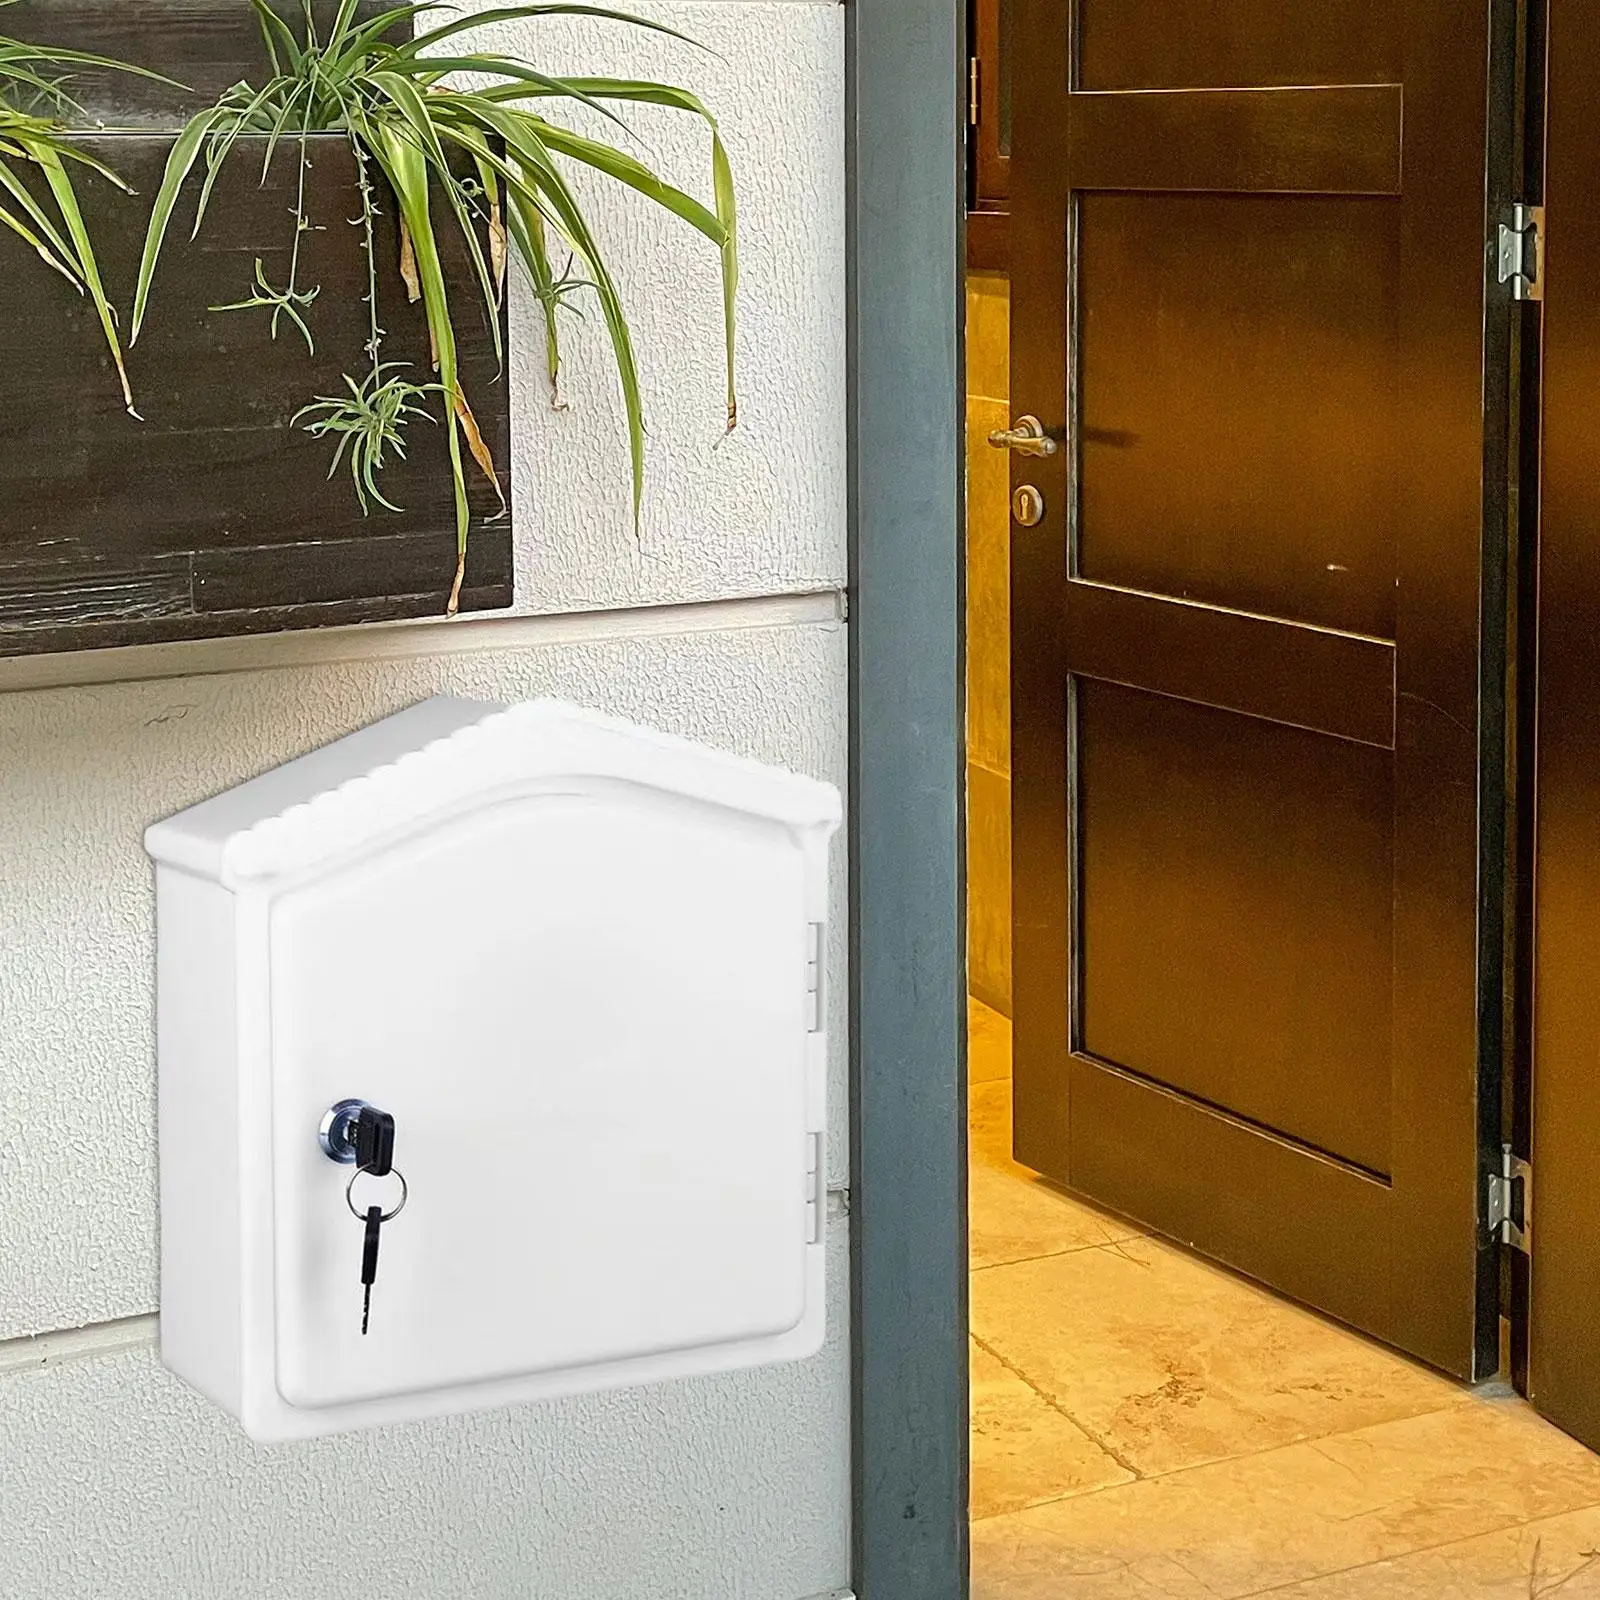 Wall Mounted Milk Box 8.66inchx3.54inchx9.84inch Wall Mailbox Lockable Milk Delivery Box for Restaurant Home Household Office